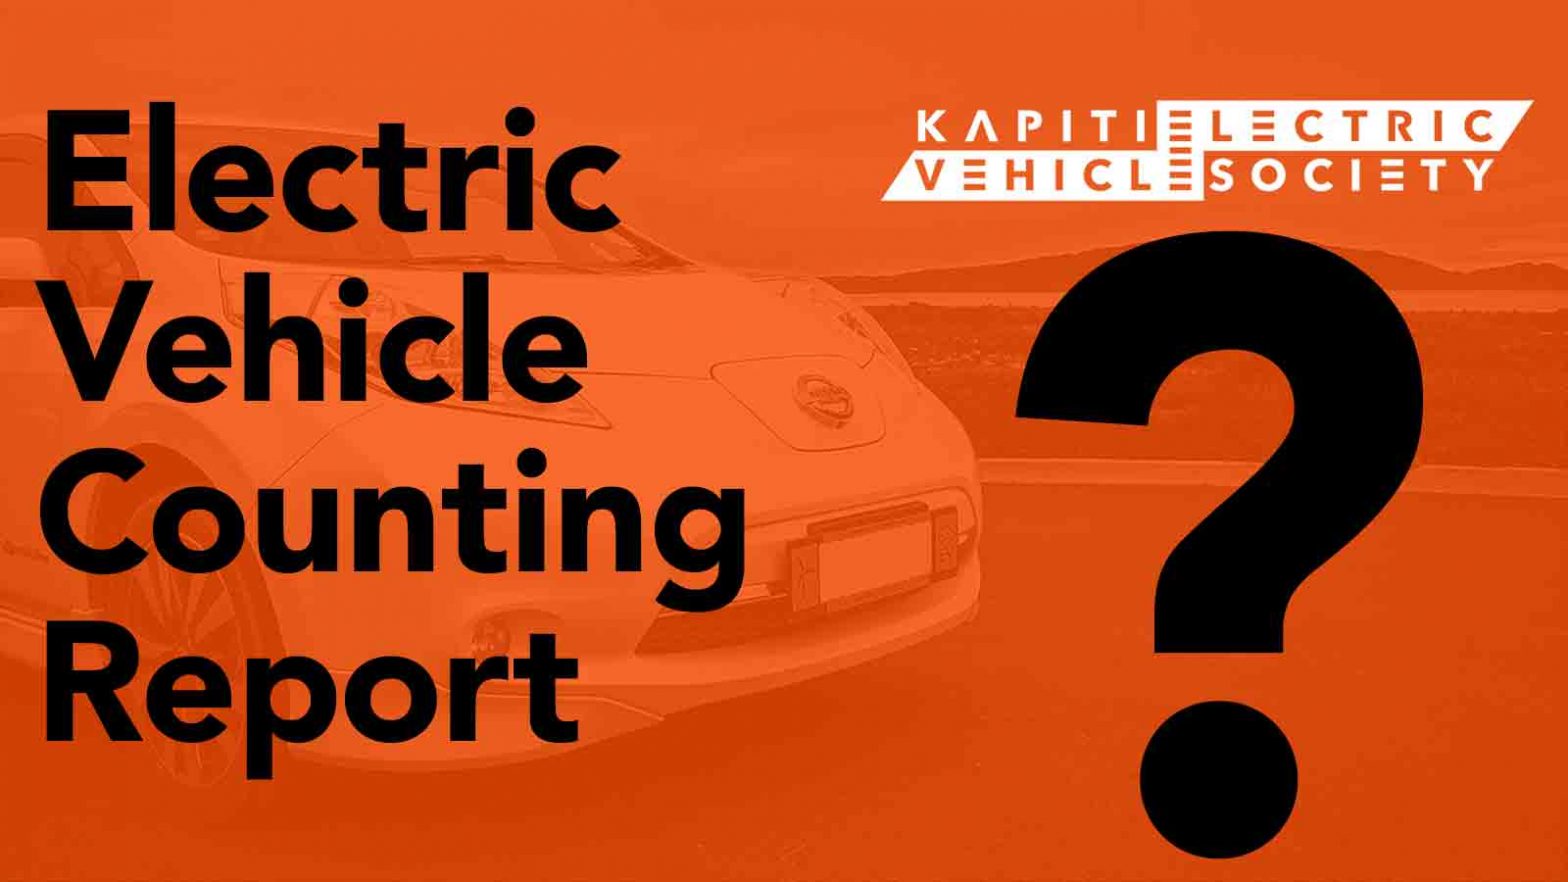 Electric Vehicle Counting Report question